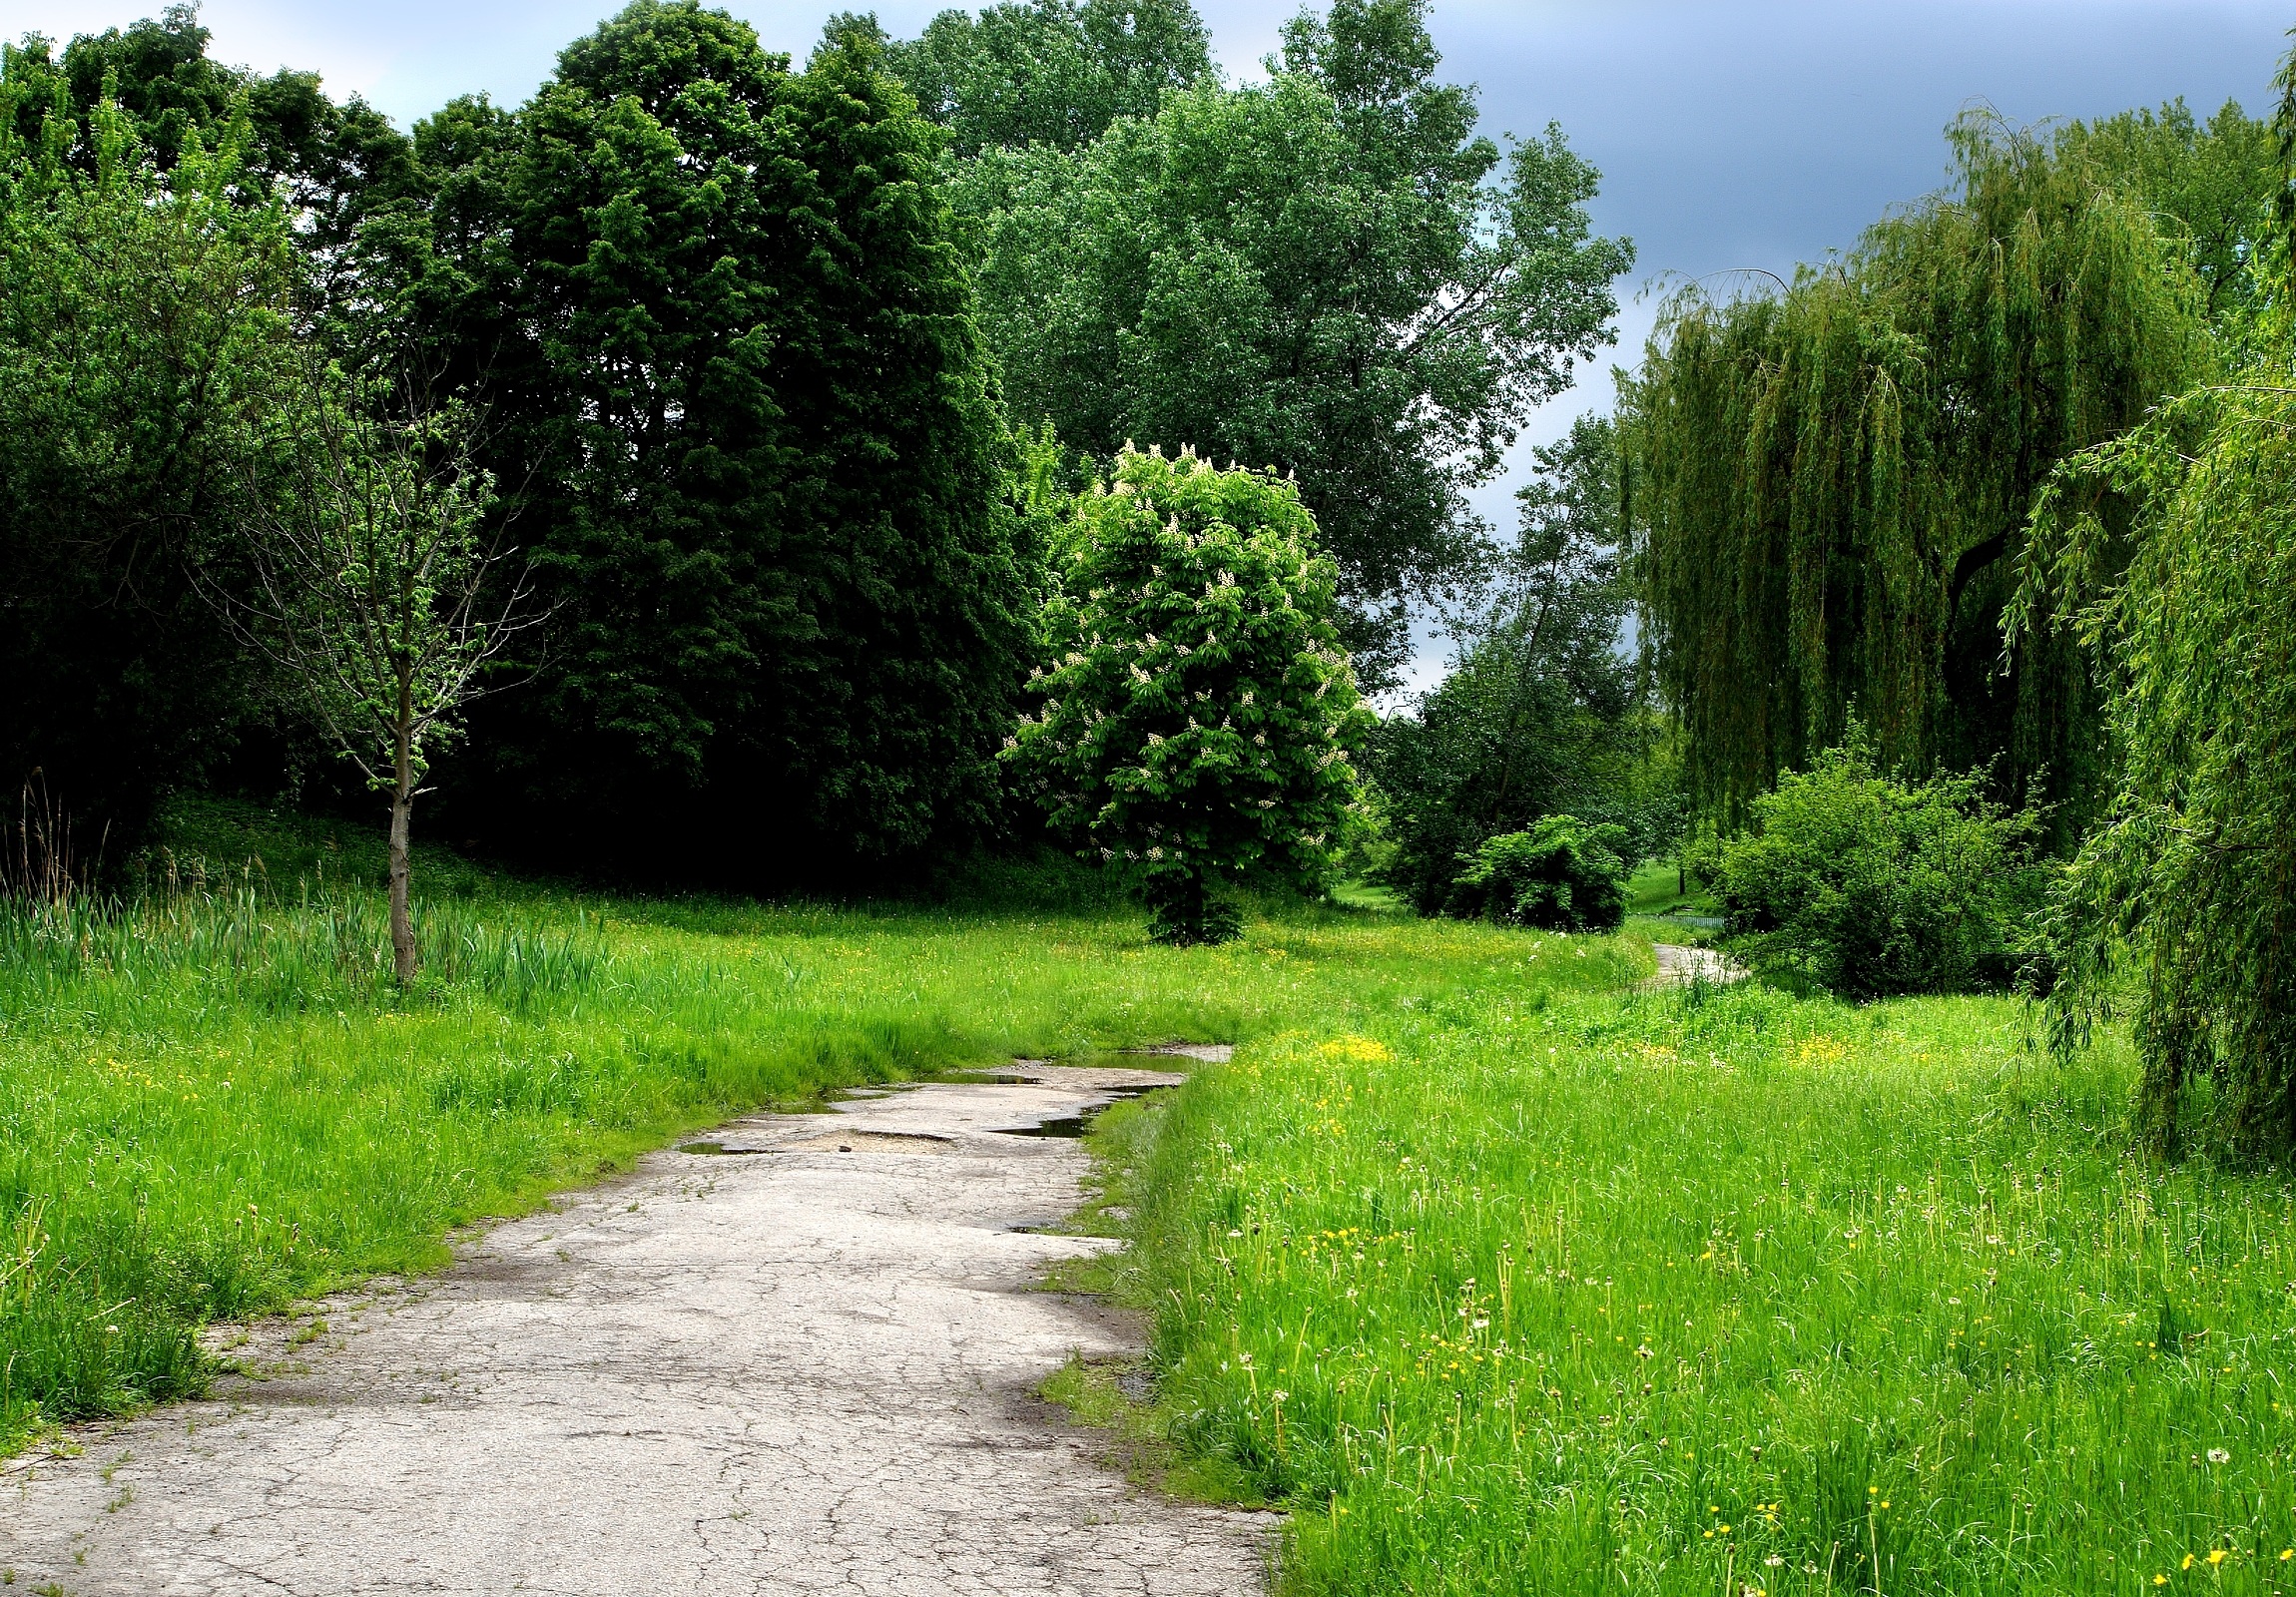 Download PC Wallpaper forest, nature, trees, grass, path, trail